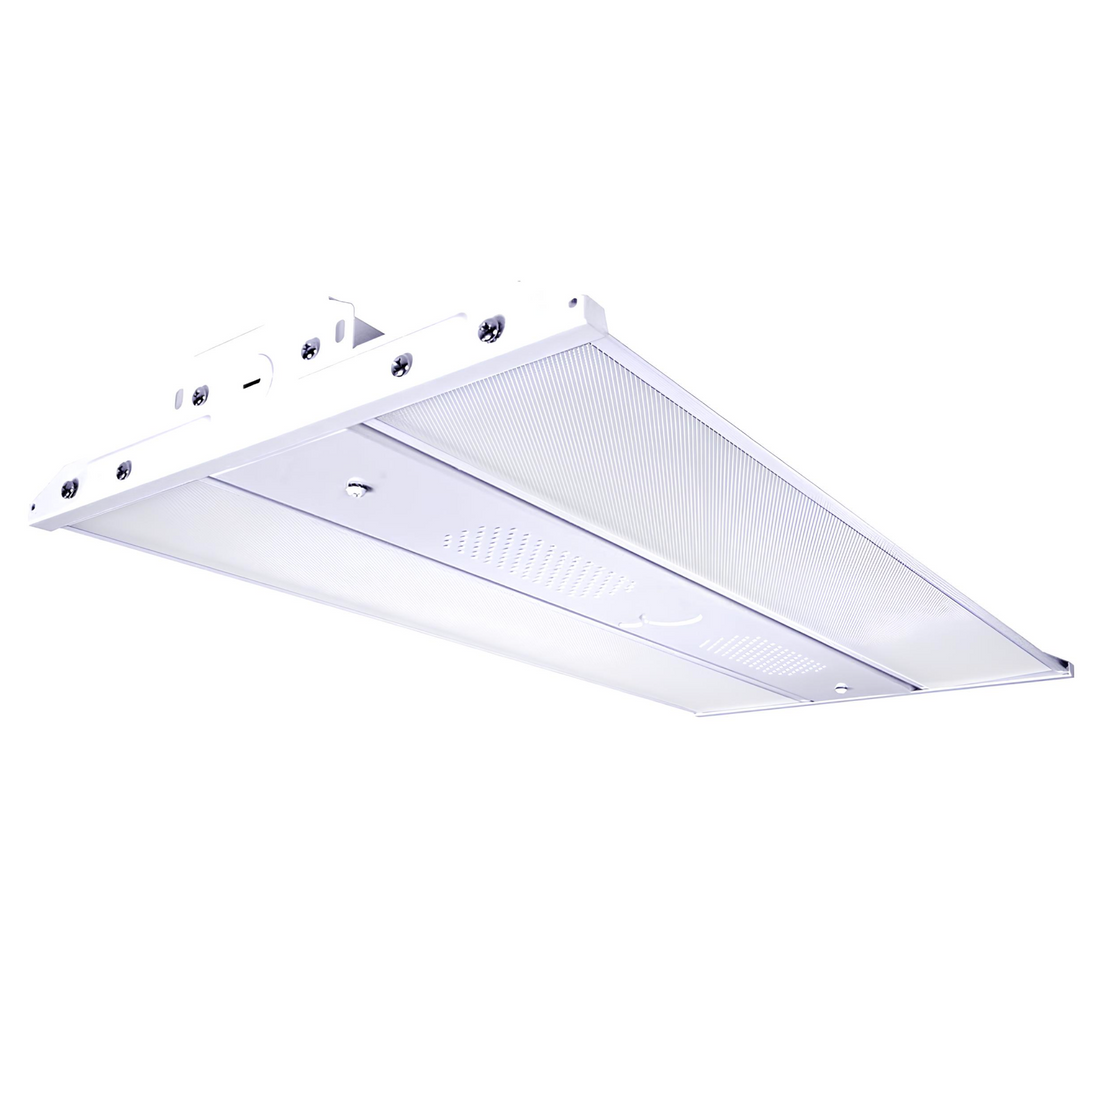 LED Linear High Bay Light - 110W - 5000K- 120-277VAC - 16500 Lumens - 0-10V Dimmable - UL Listed - DLC Premium Listed - 5 Years Warranty - 2-Pack